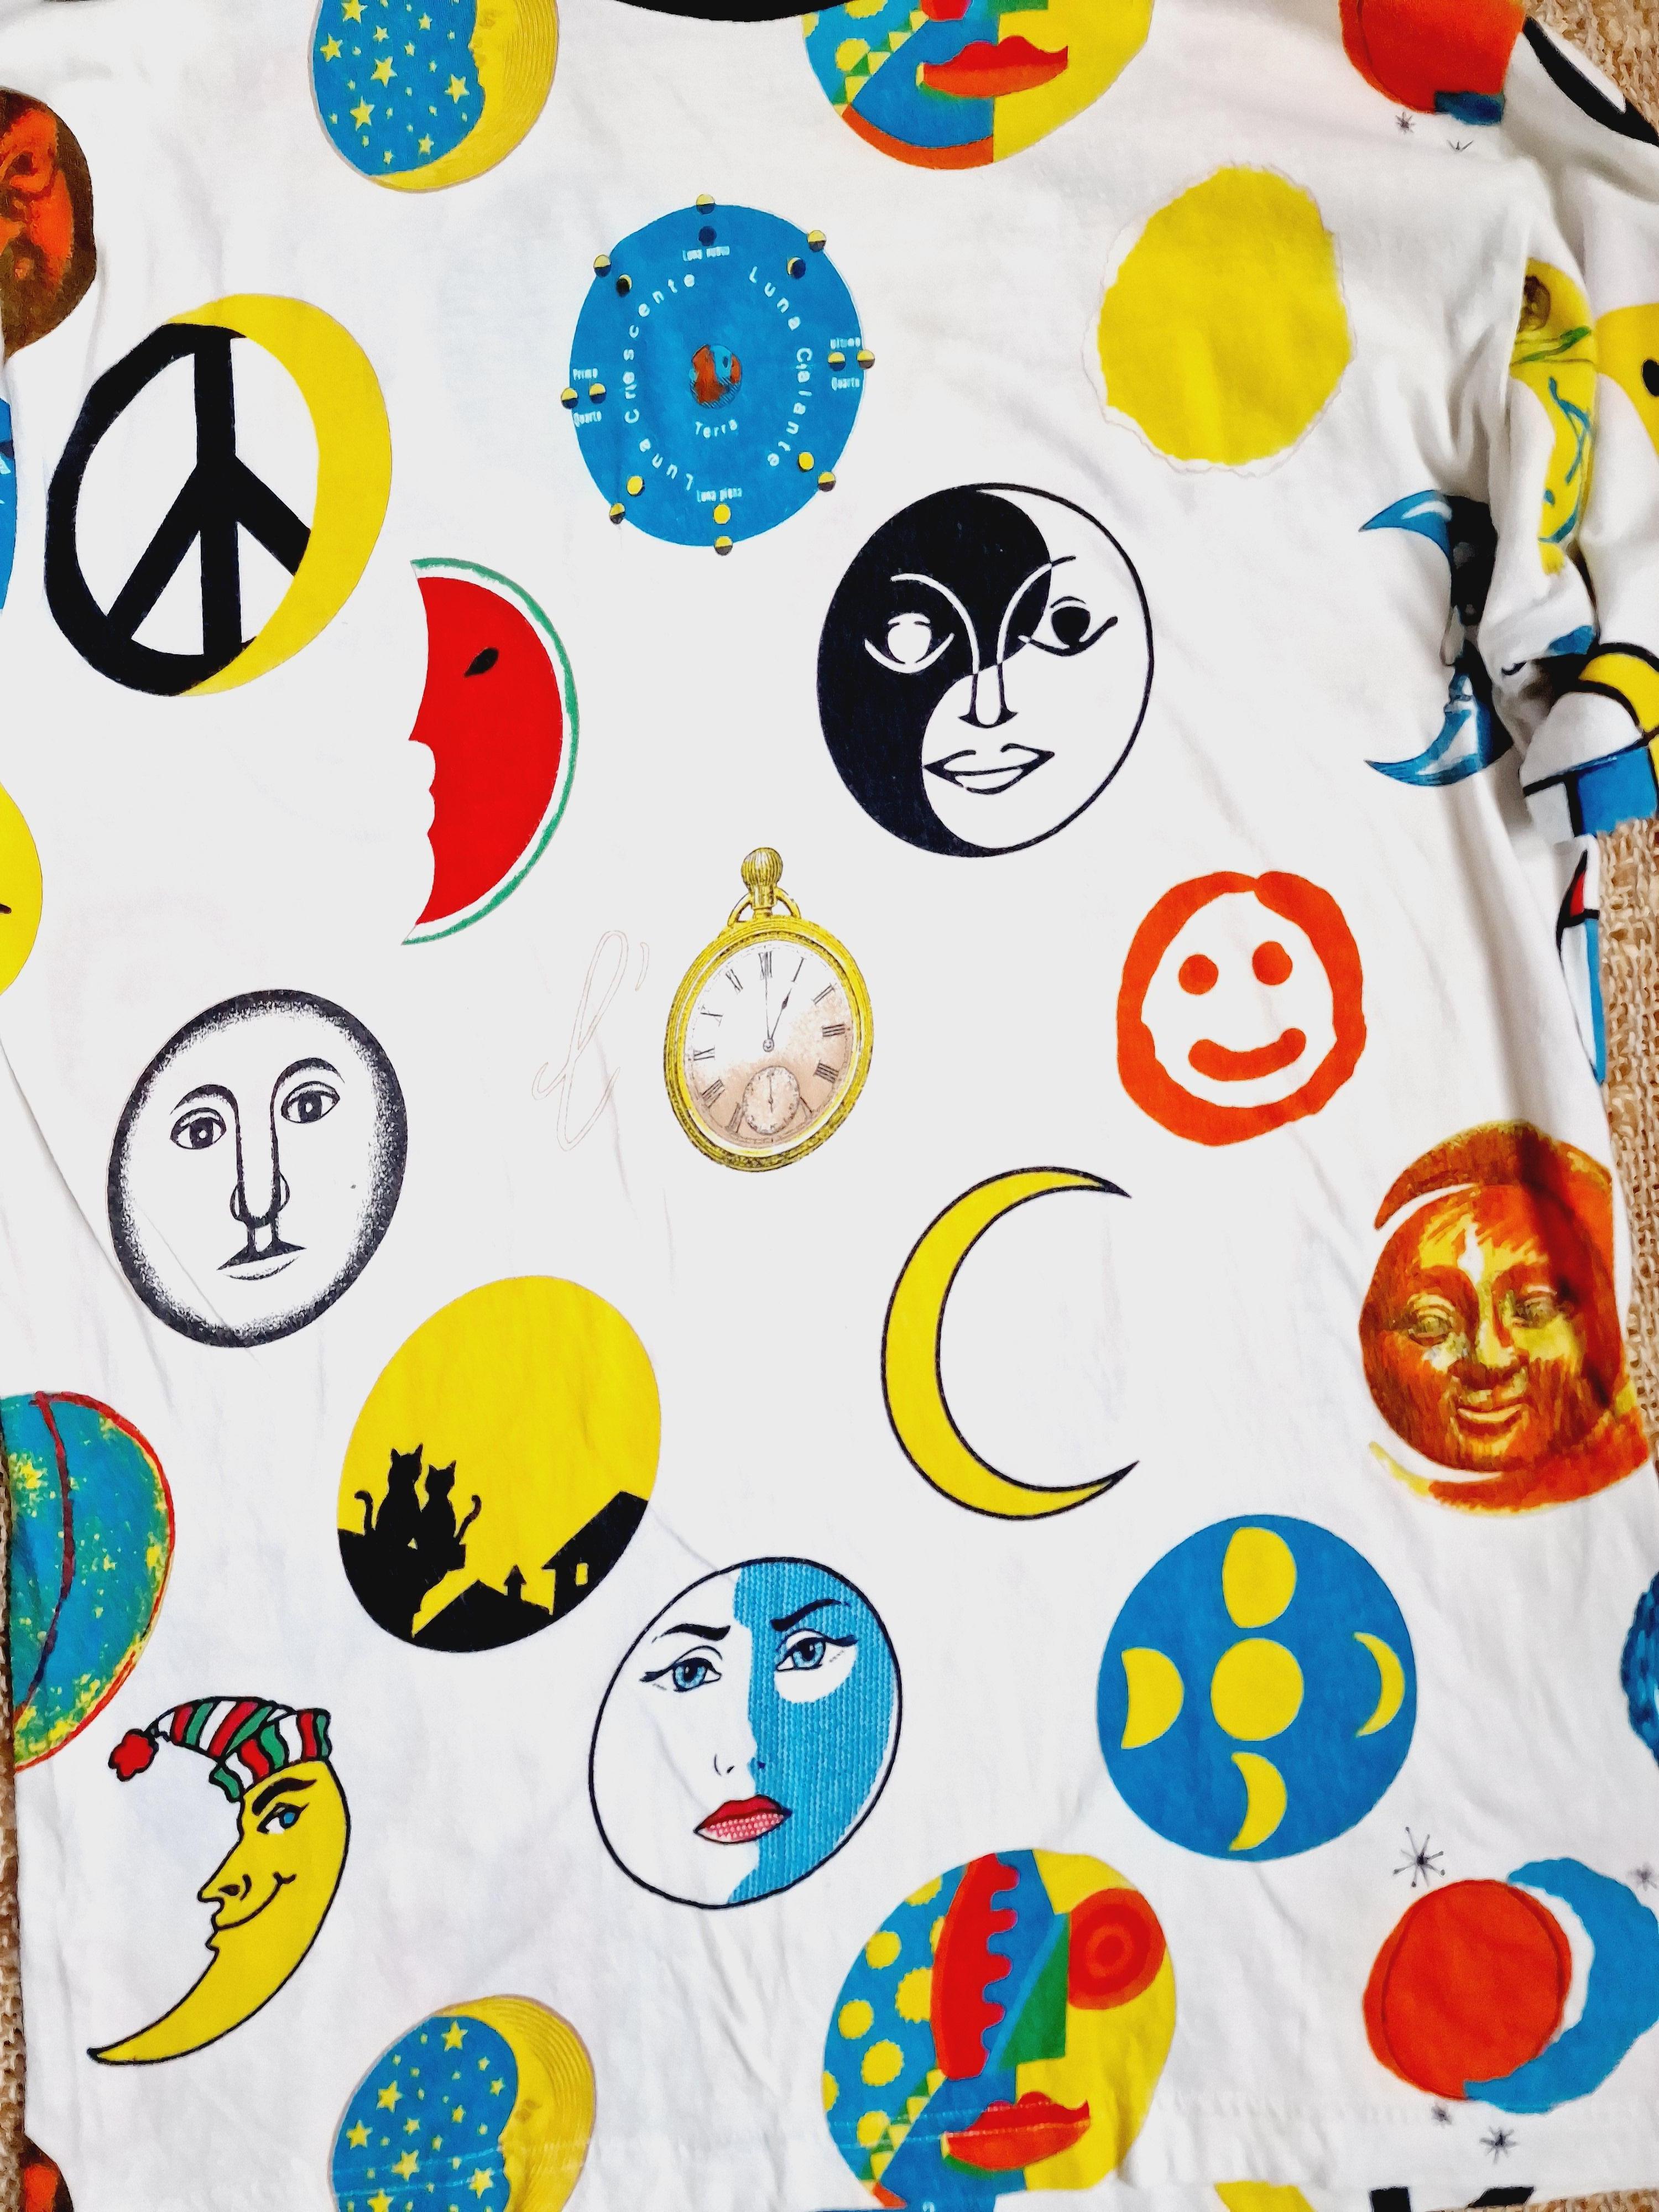 Symbol shirt by Moschino!
Pattern: Moon, Sun, Peace, Smiley, Earth, Jin Jang, Abstact face, Old Clock ect.

VERY GOOD condition!

SIZE
Women: XL.
Men: medium / smaller large
Marked size: XL.
Lnegth: 73 cm / 28.7 inch
Bust: 53 cm / 20.9 inch
Shouler